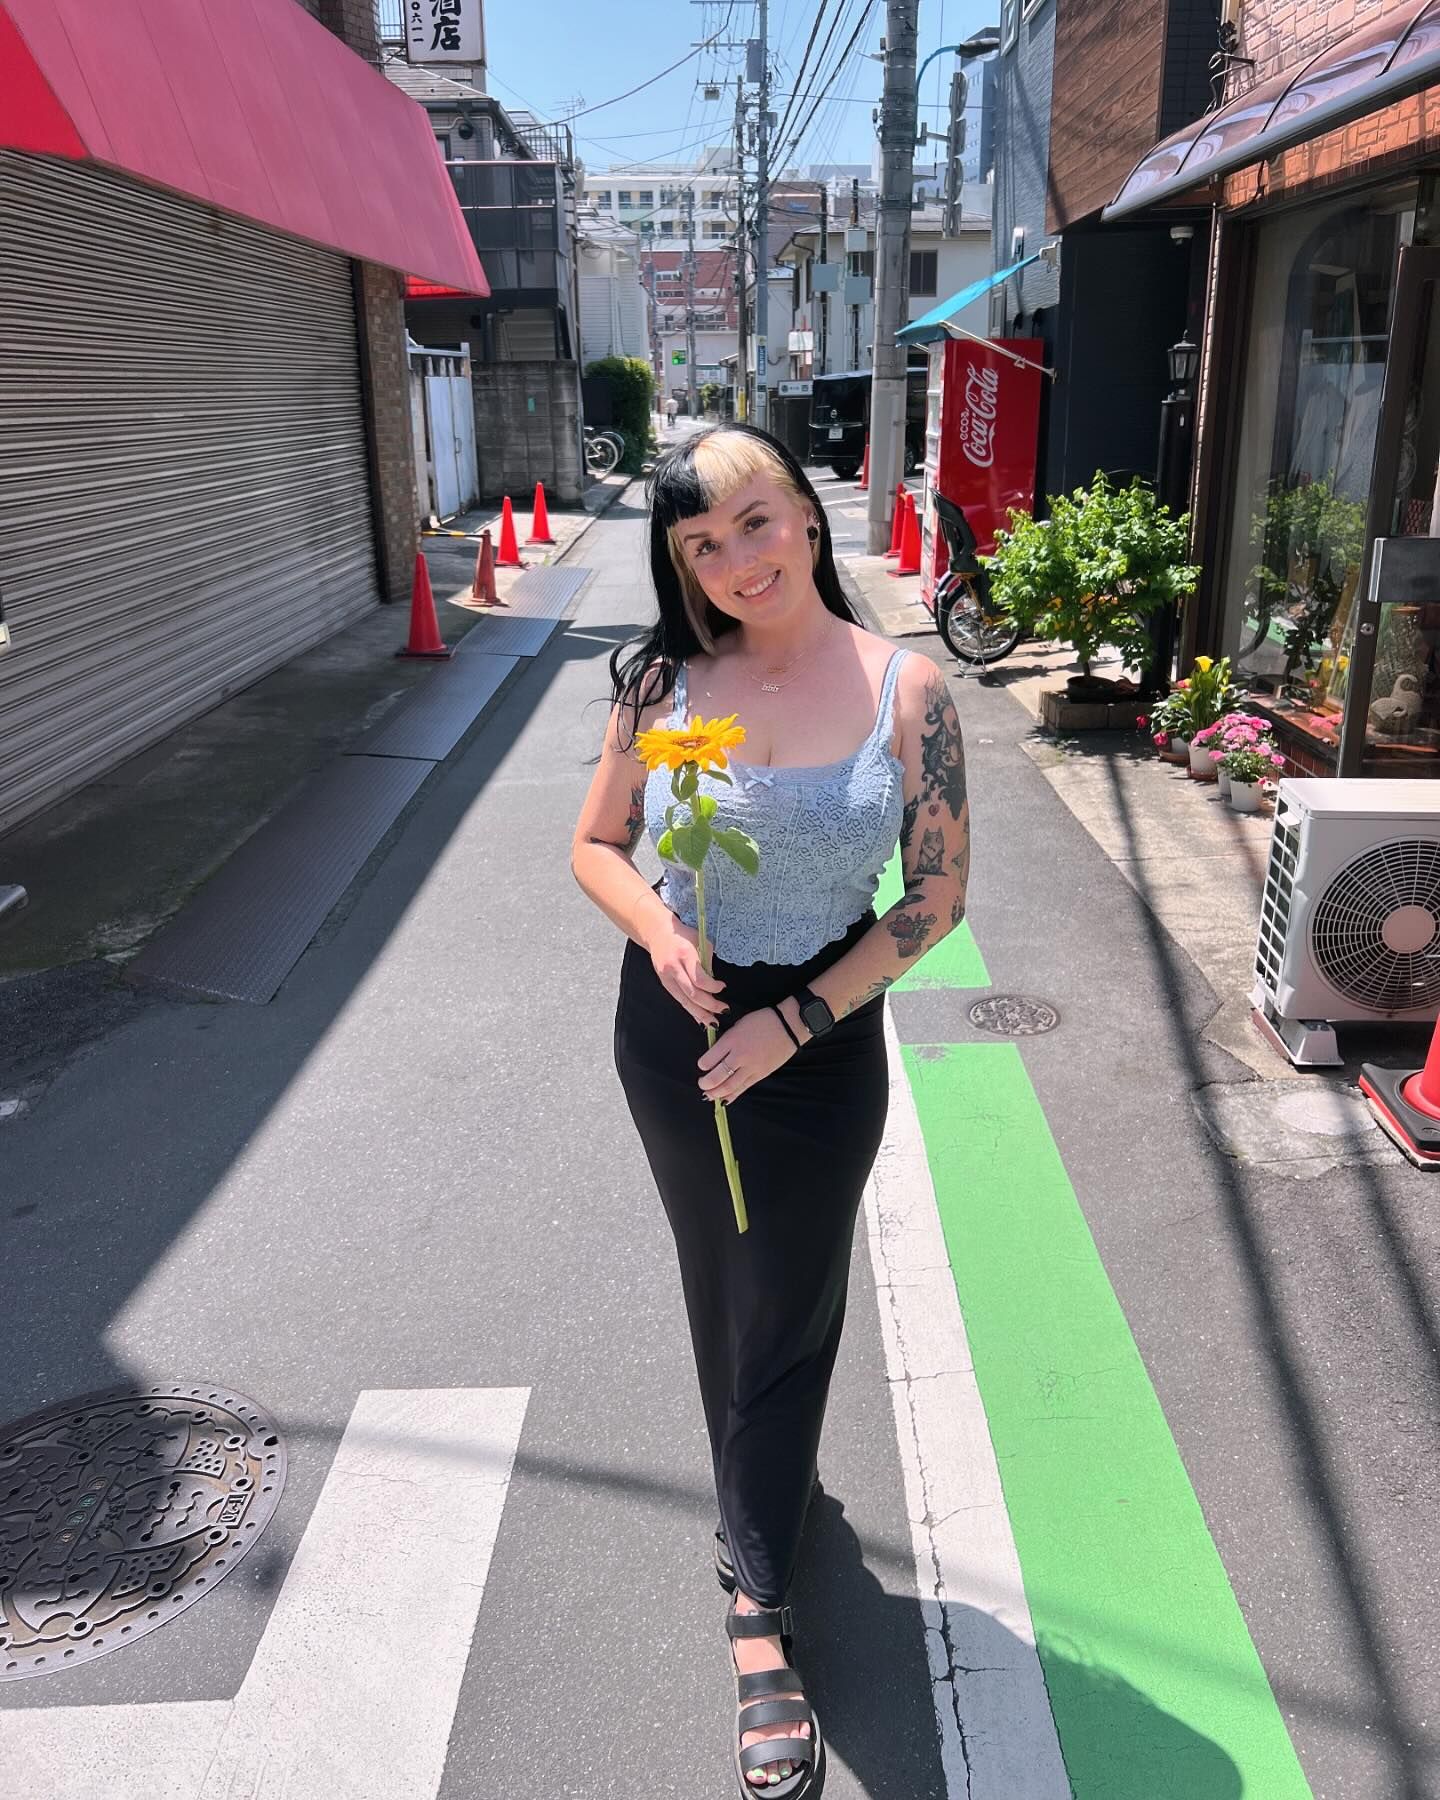 Loving Japan so far! 🇯🇵 Have you been before? ❤️ Did a little exploring in Shinjuku, now off to Kyoto 😍